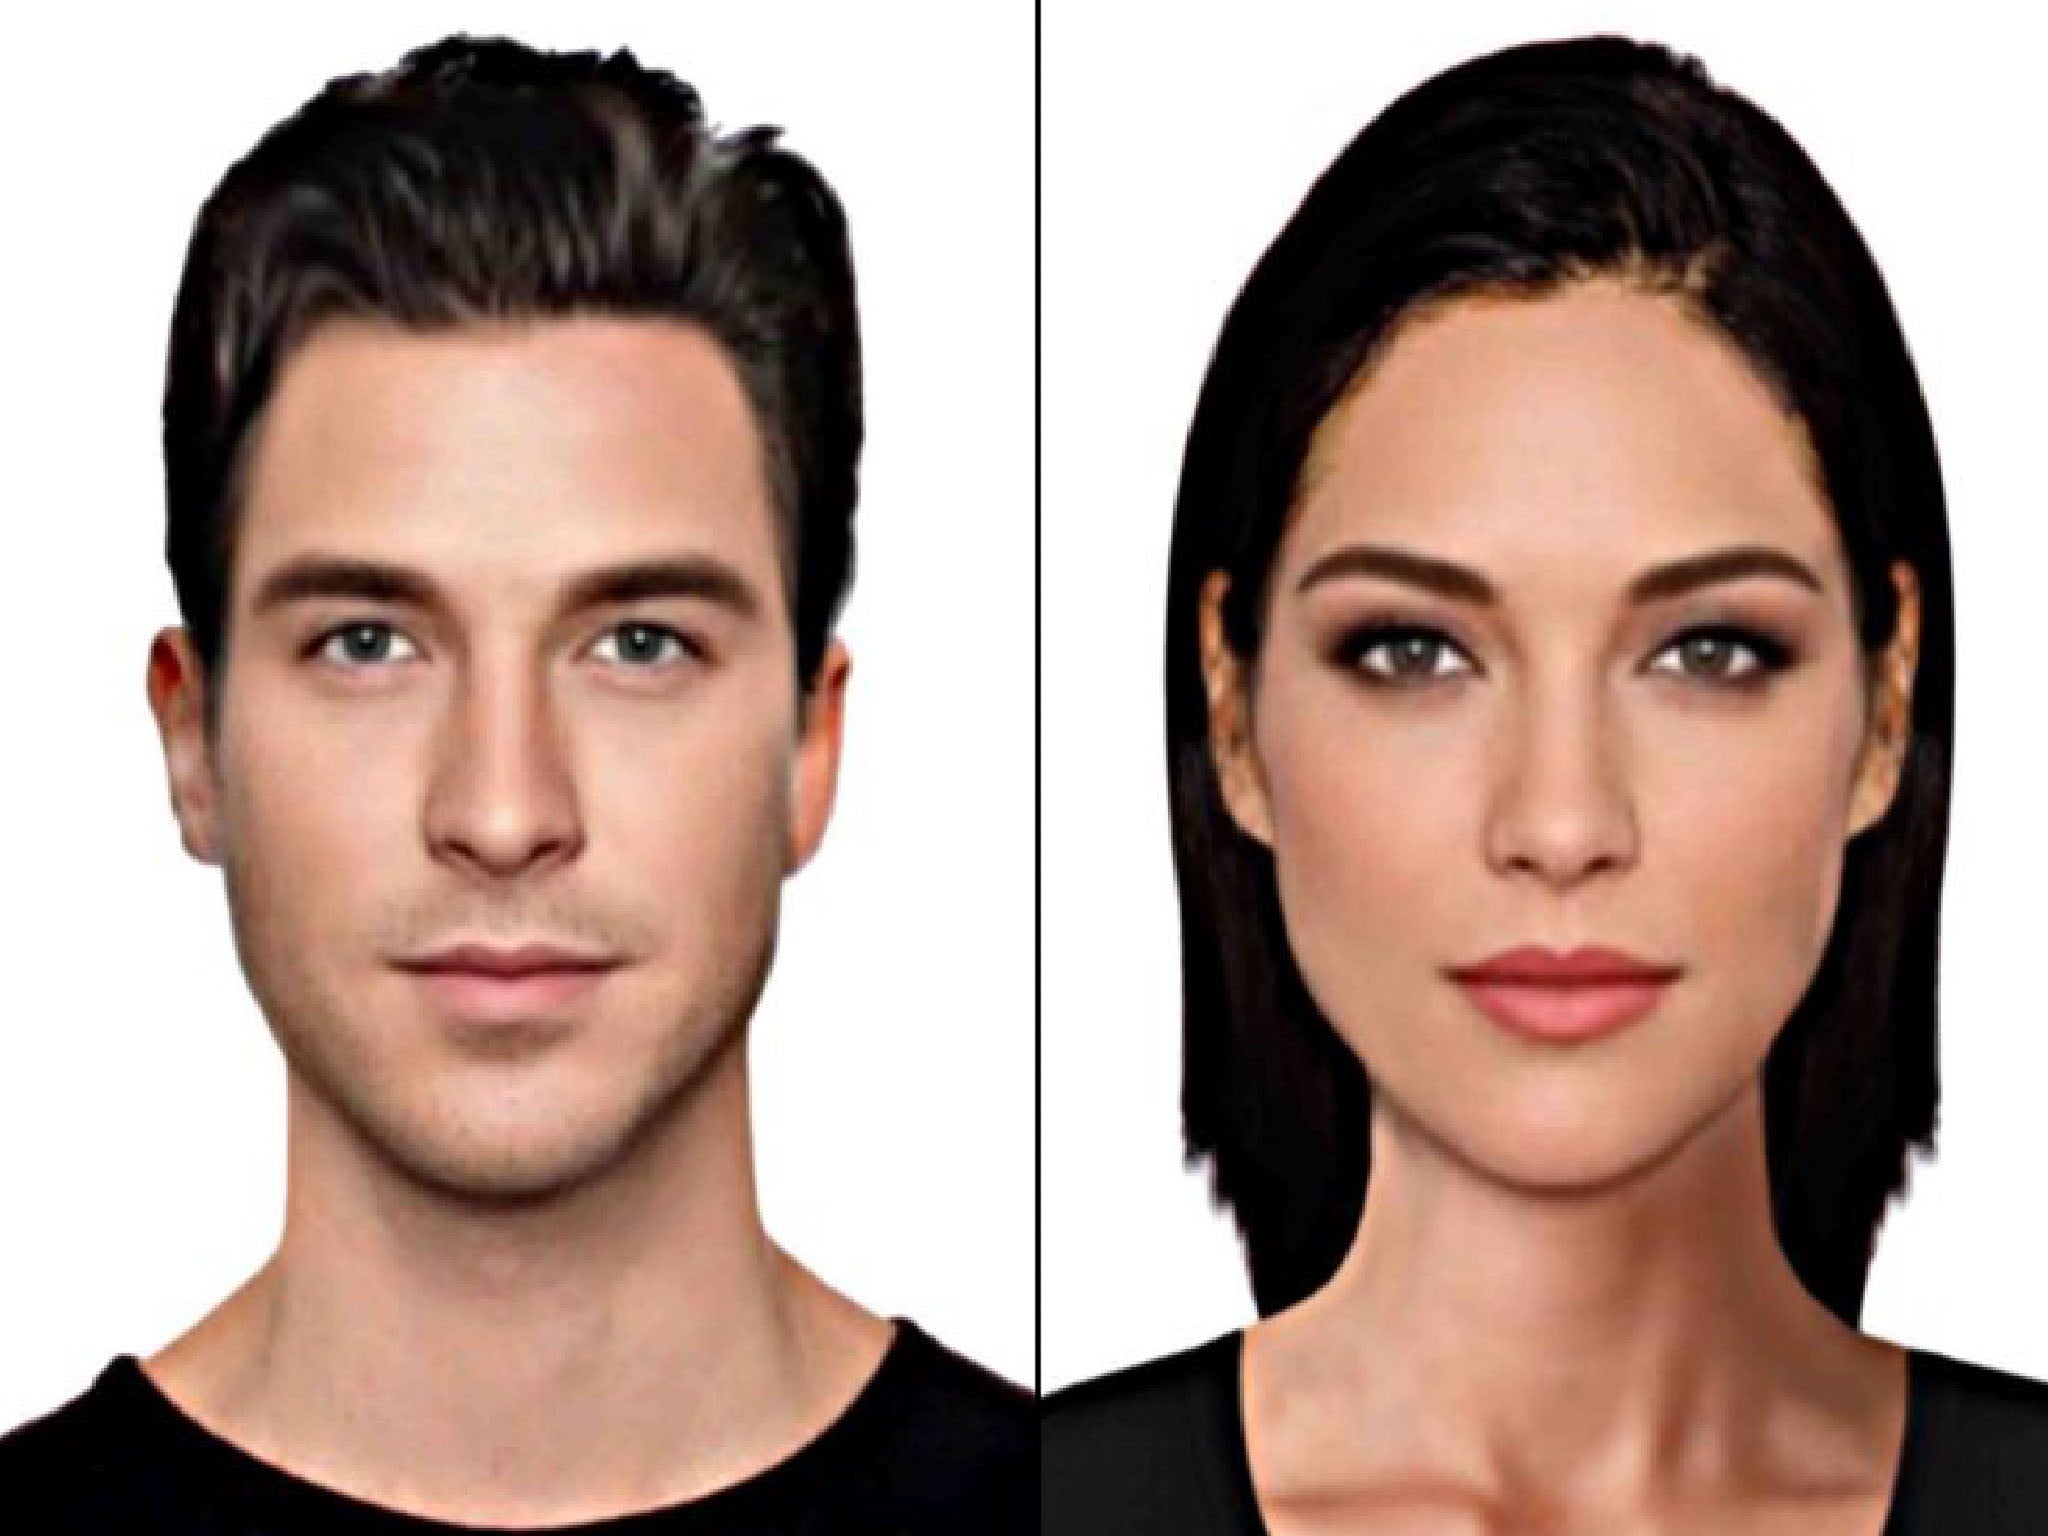 These faces are deemed to be the most attractive in a study of faces